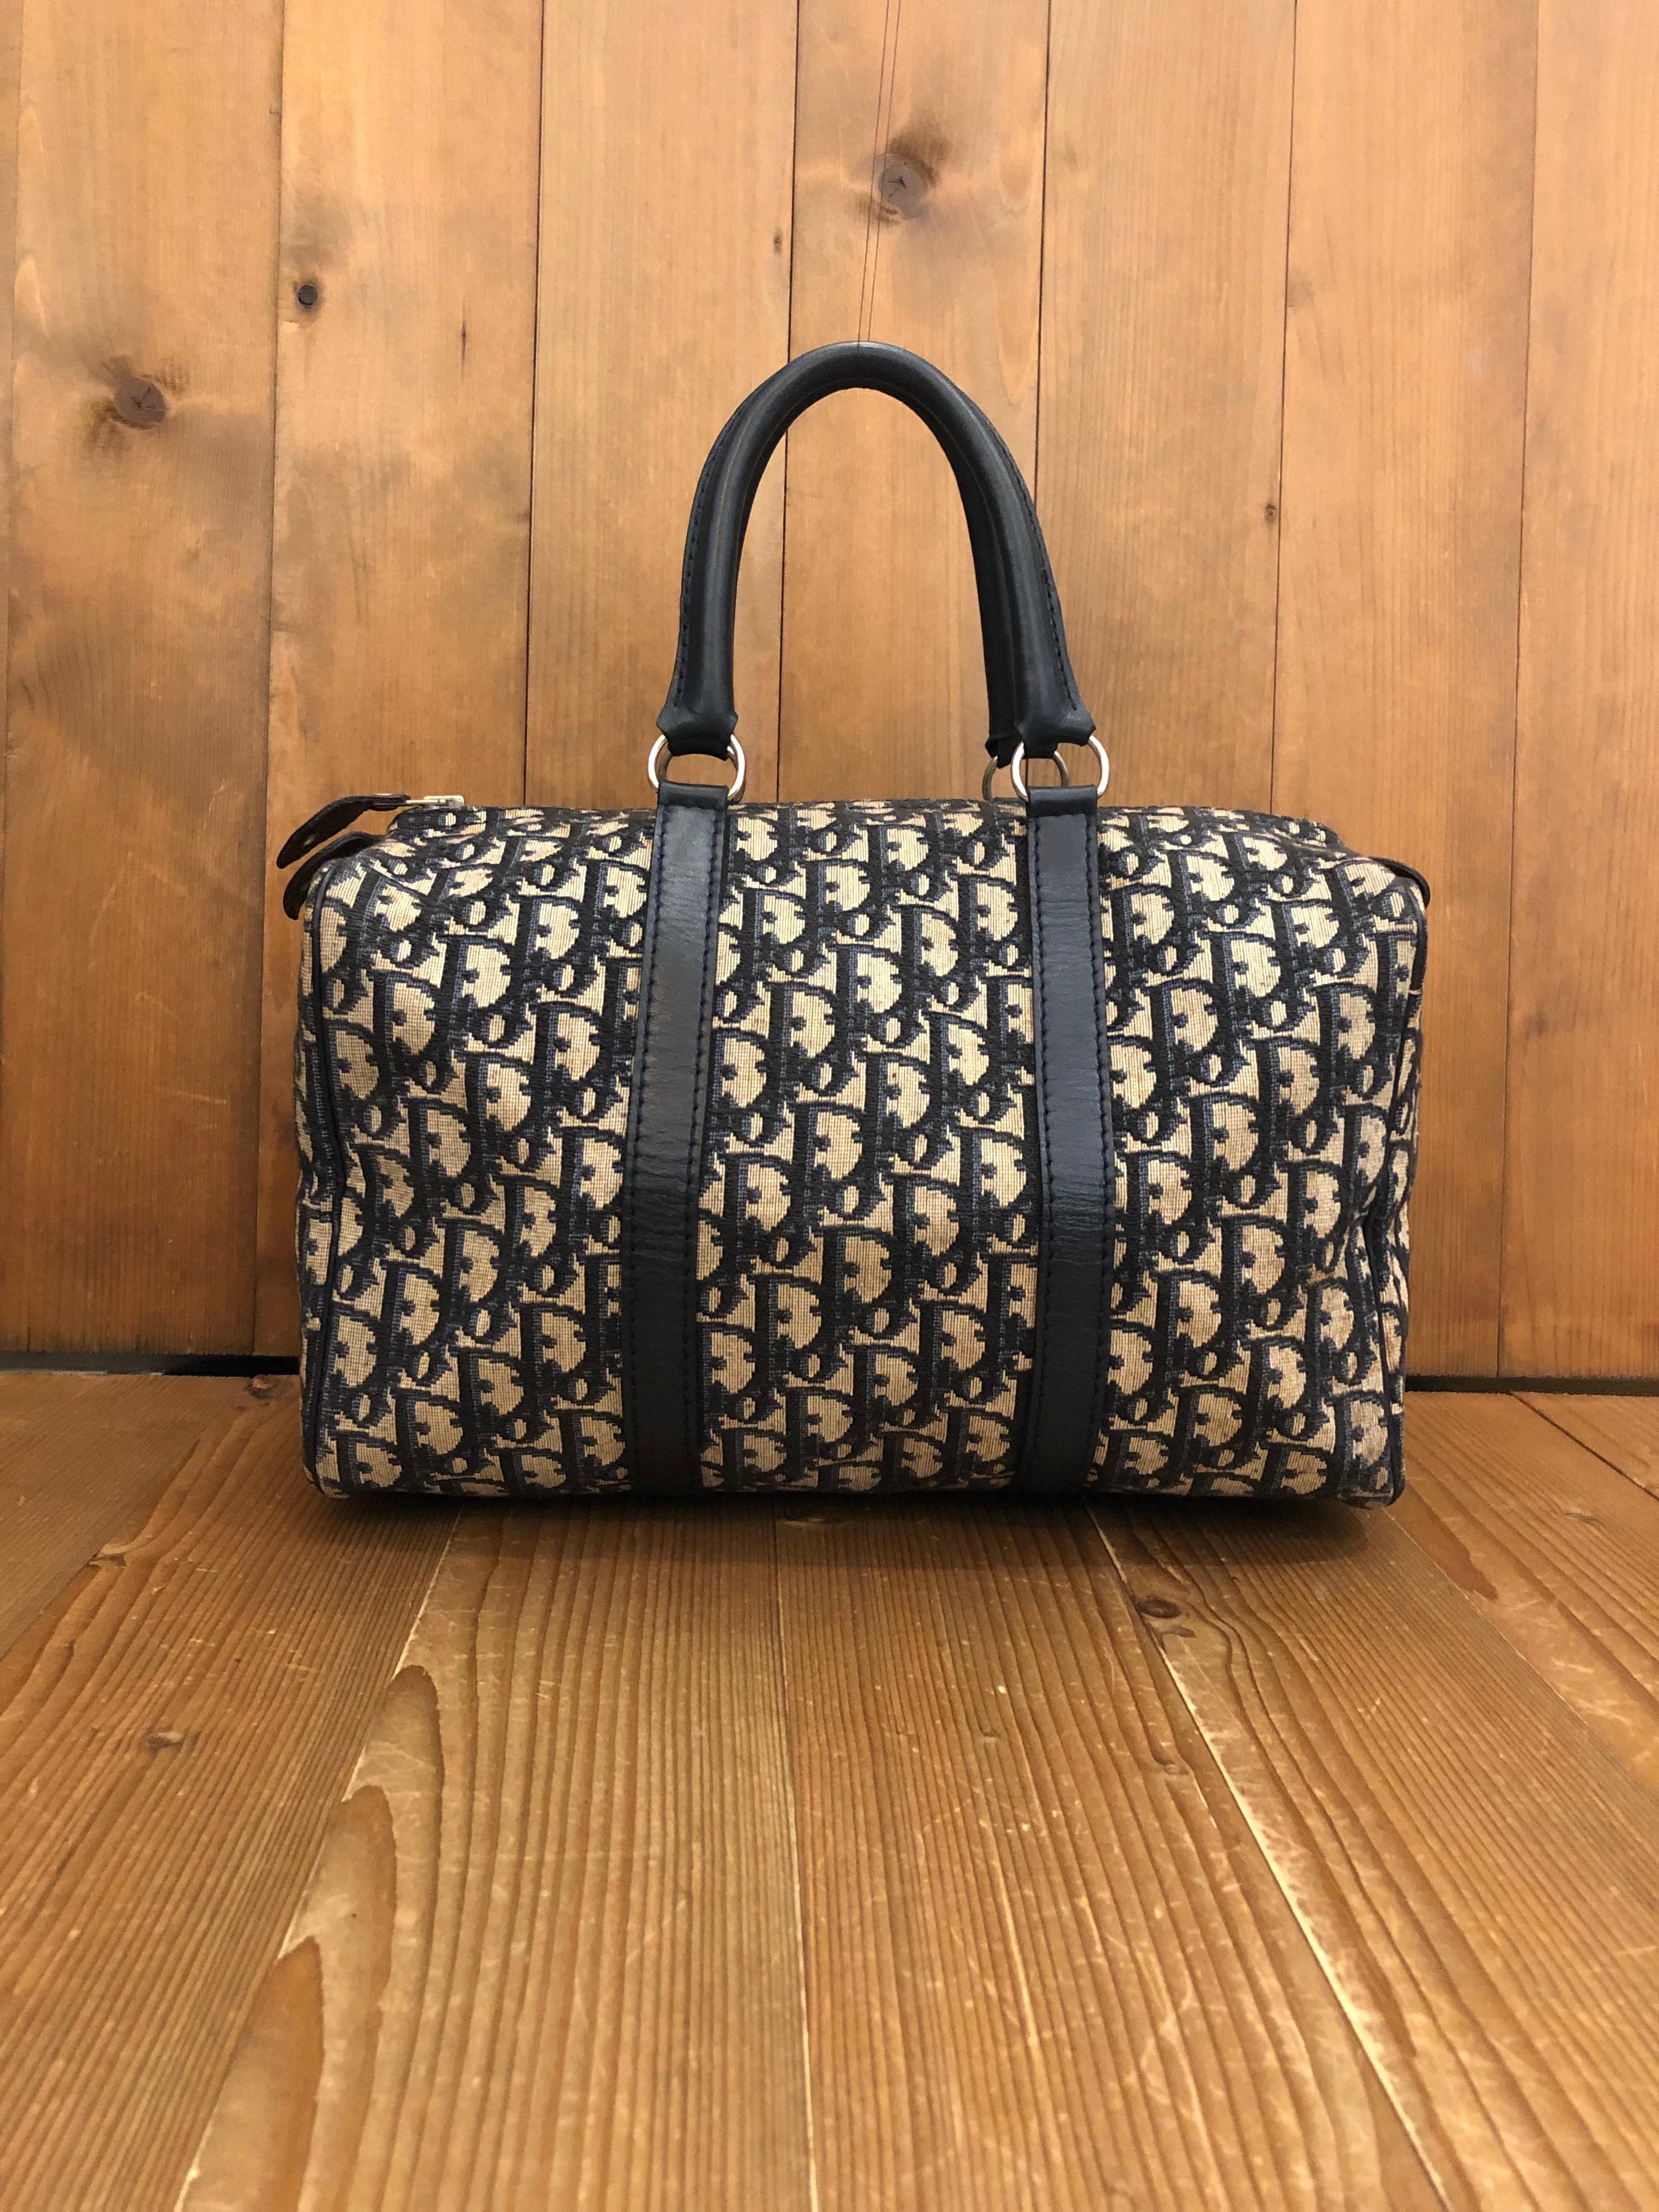 1970s CHRISTIAN DIOR Trotter Boston Bag 30 in navy jacquard. 
Material: Jacquard and leather
Color: Navy
Origin: France 
Measurements: 12”x7.5”x6.5”
Handle Drop. 5”
Specifications: 1 interior zip pocket 

Condition:
Outside: Some marks on jacquard